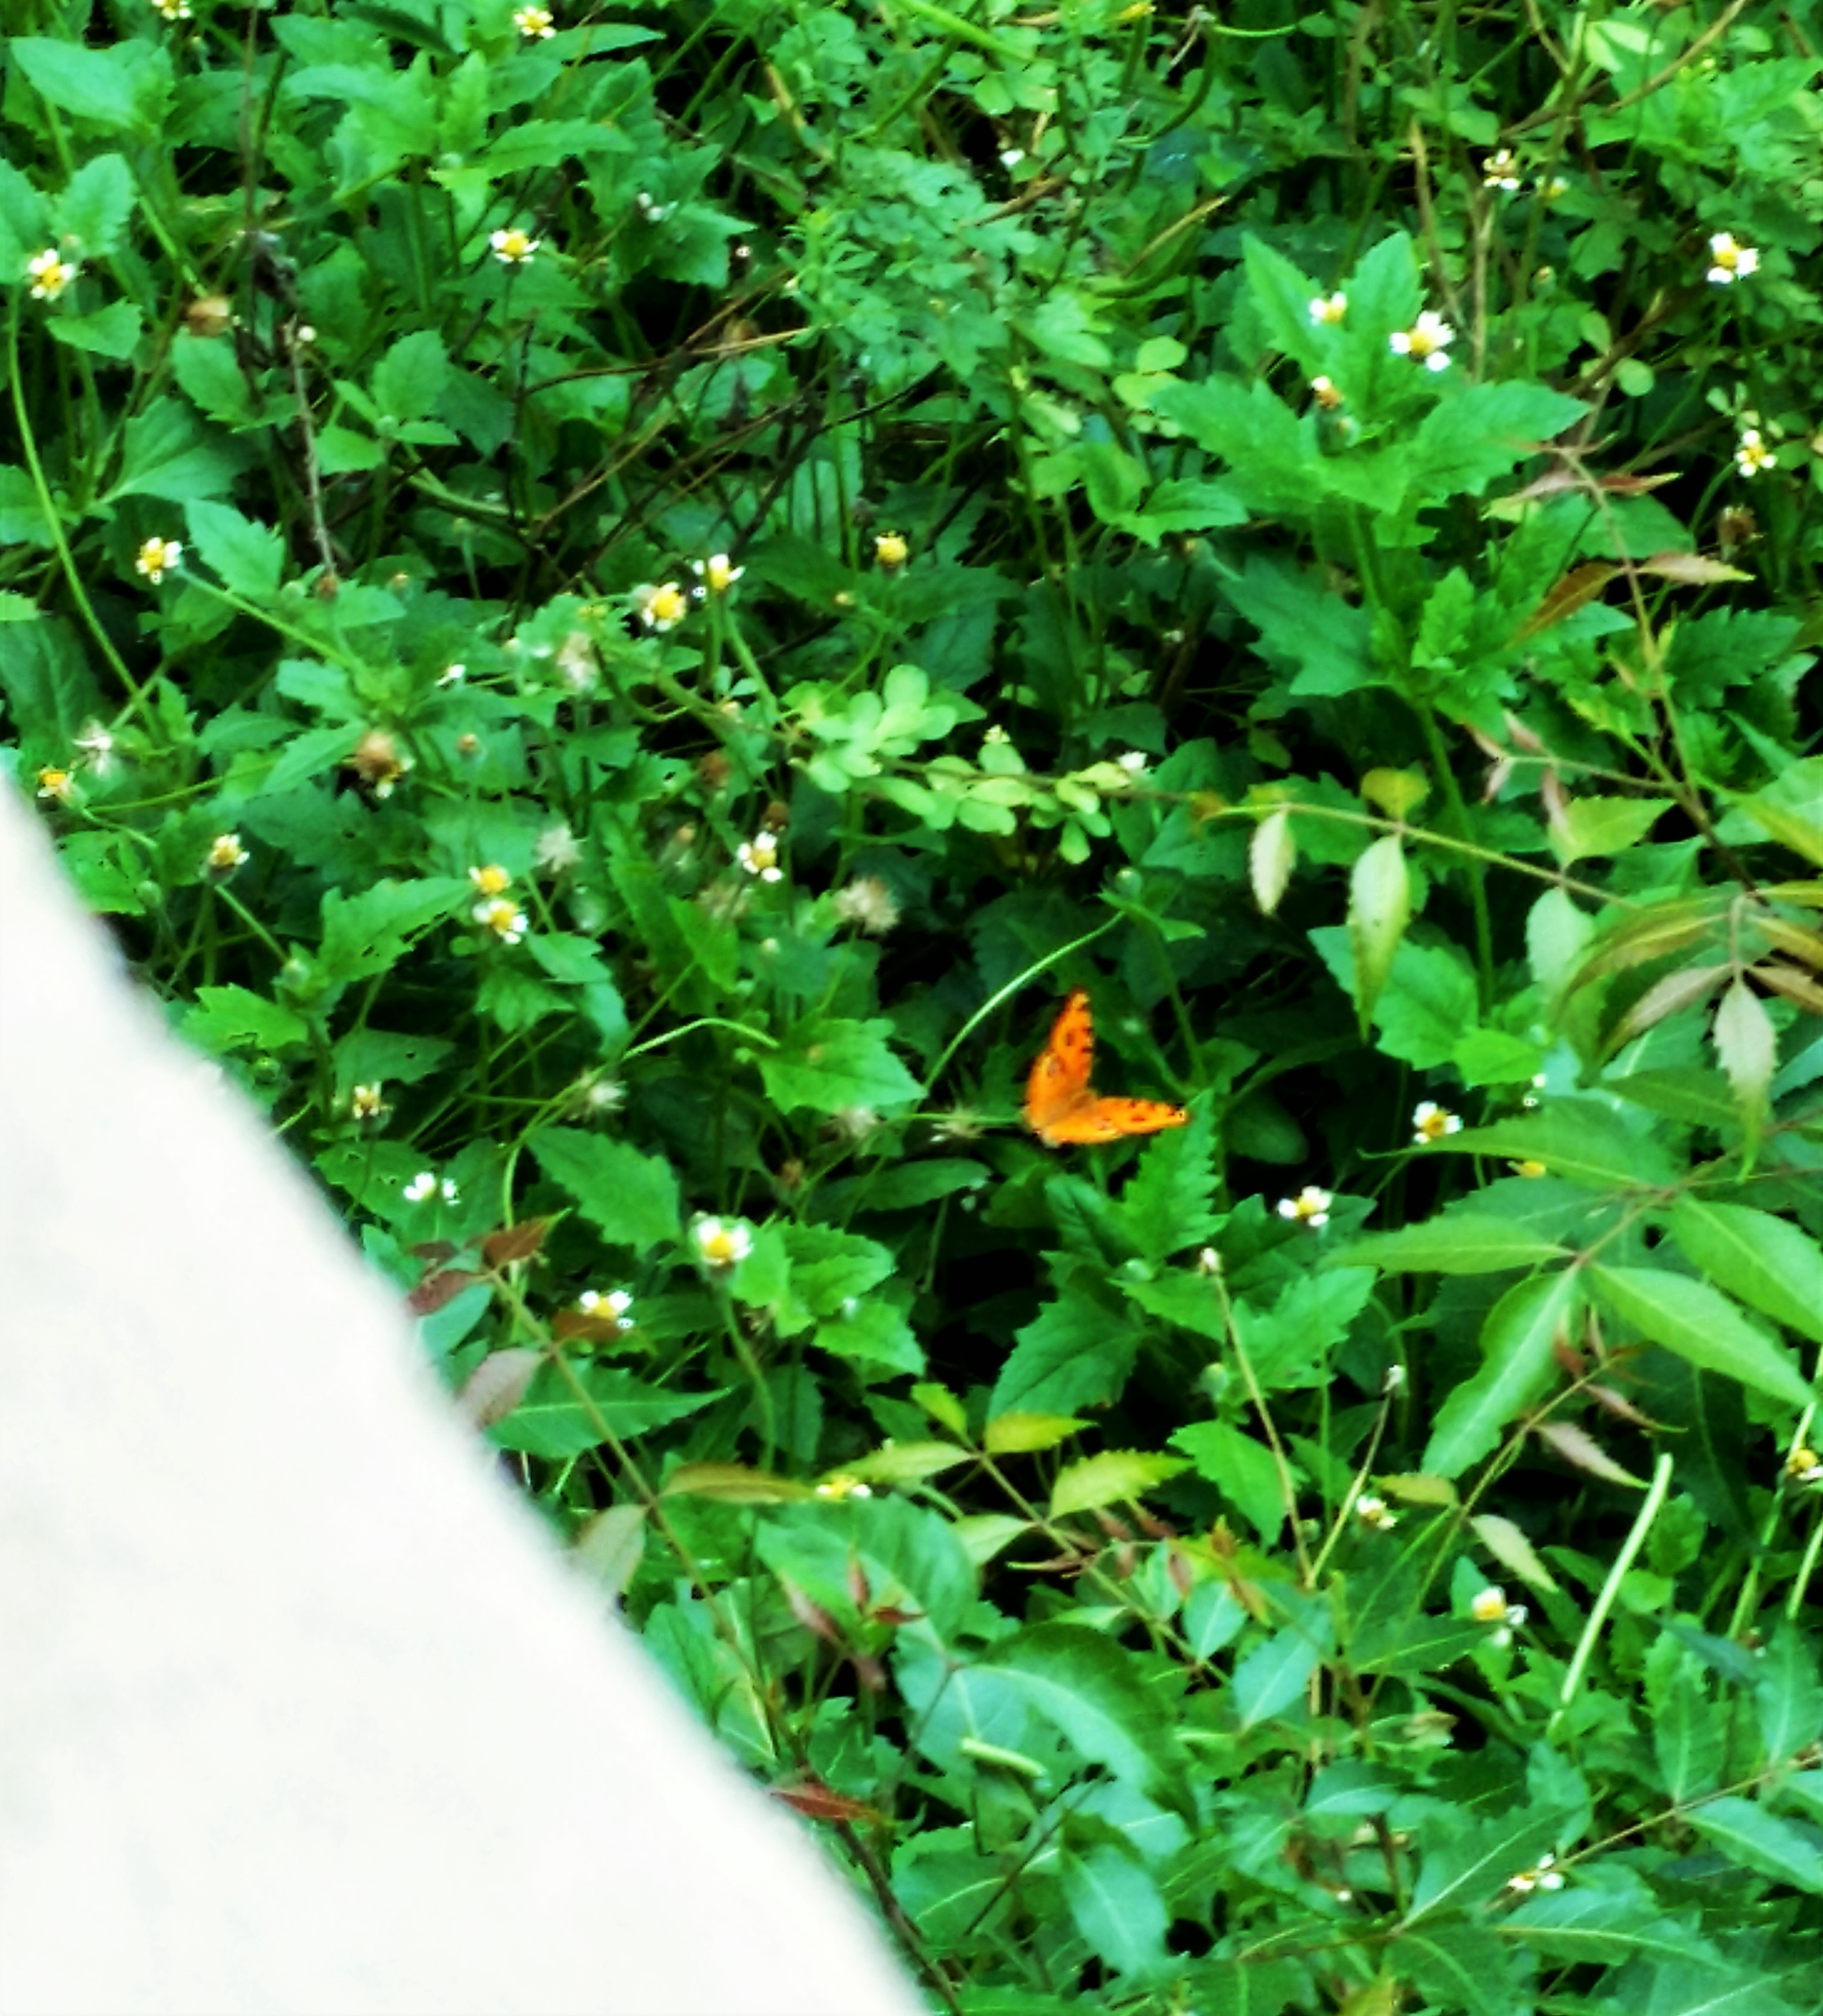 Can u find butterfly in this pic?..not so clear :(